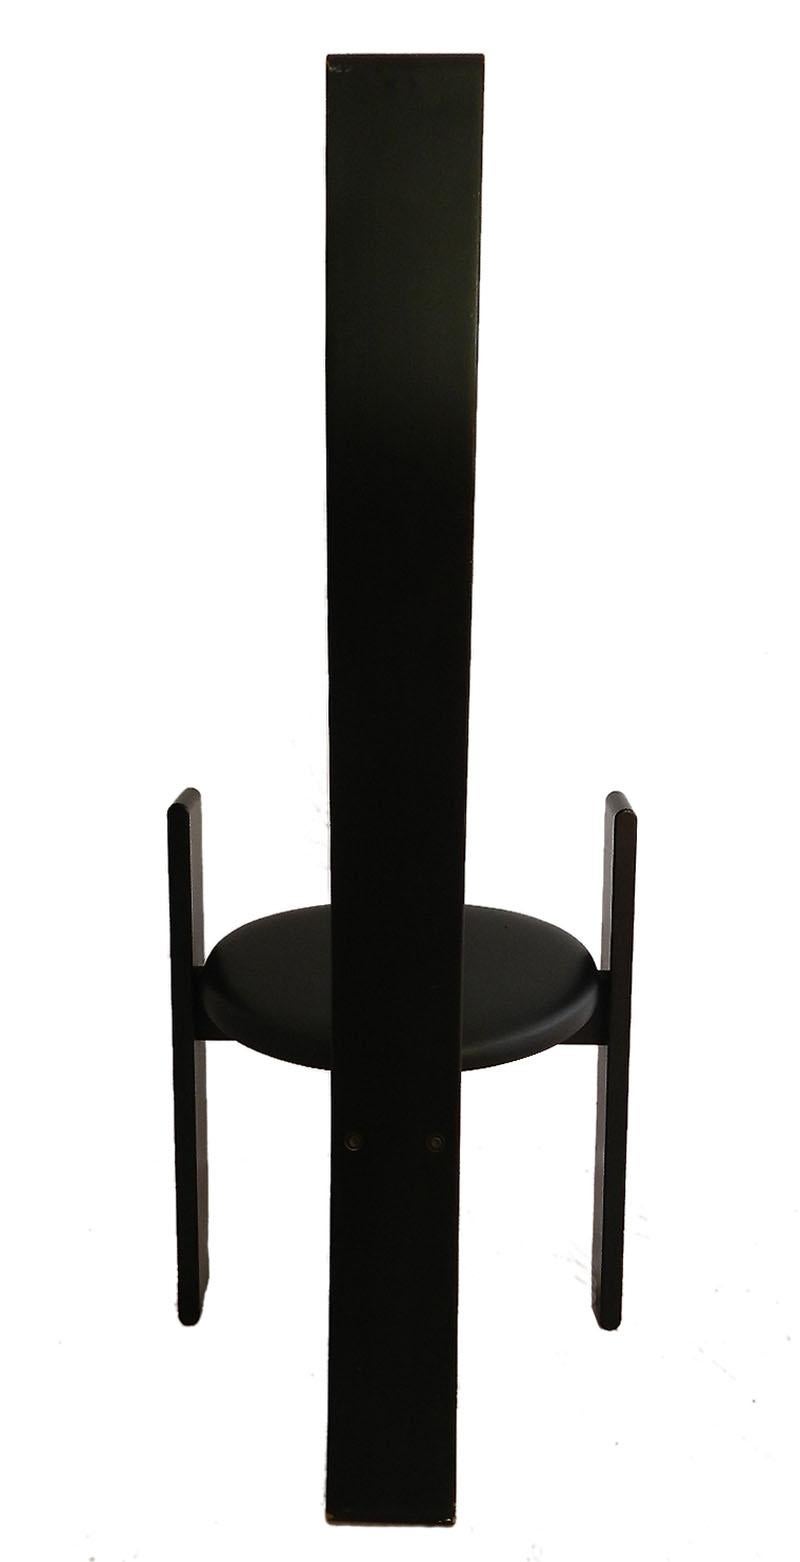 Italian Midcentury Golem Chair by Vico Magistretti 1970s Black Leather Laquered Wood 